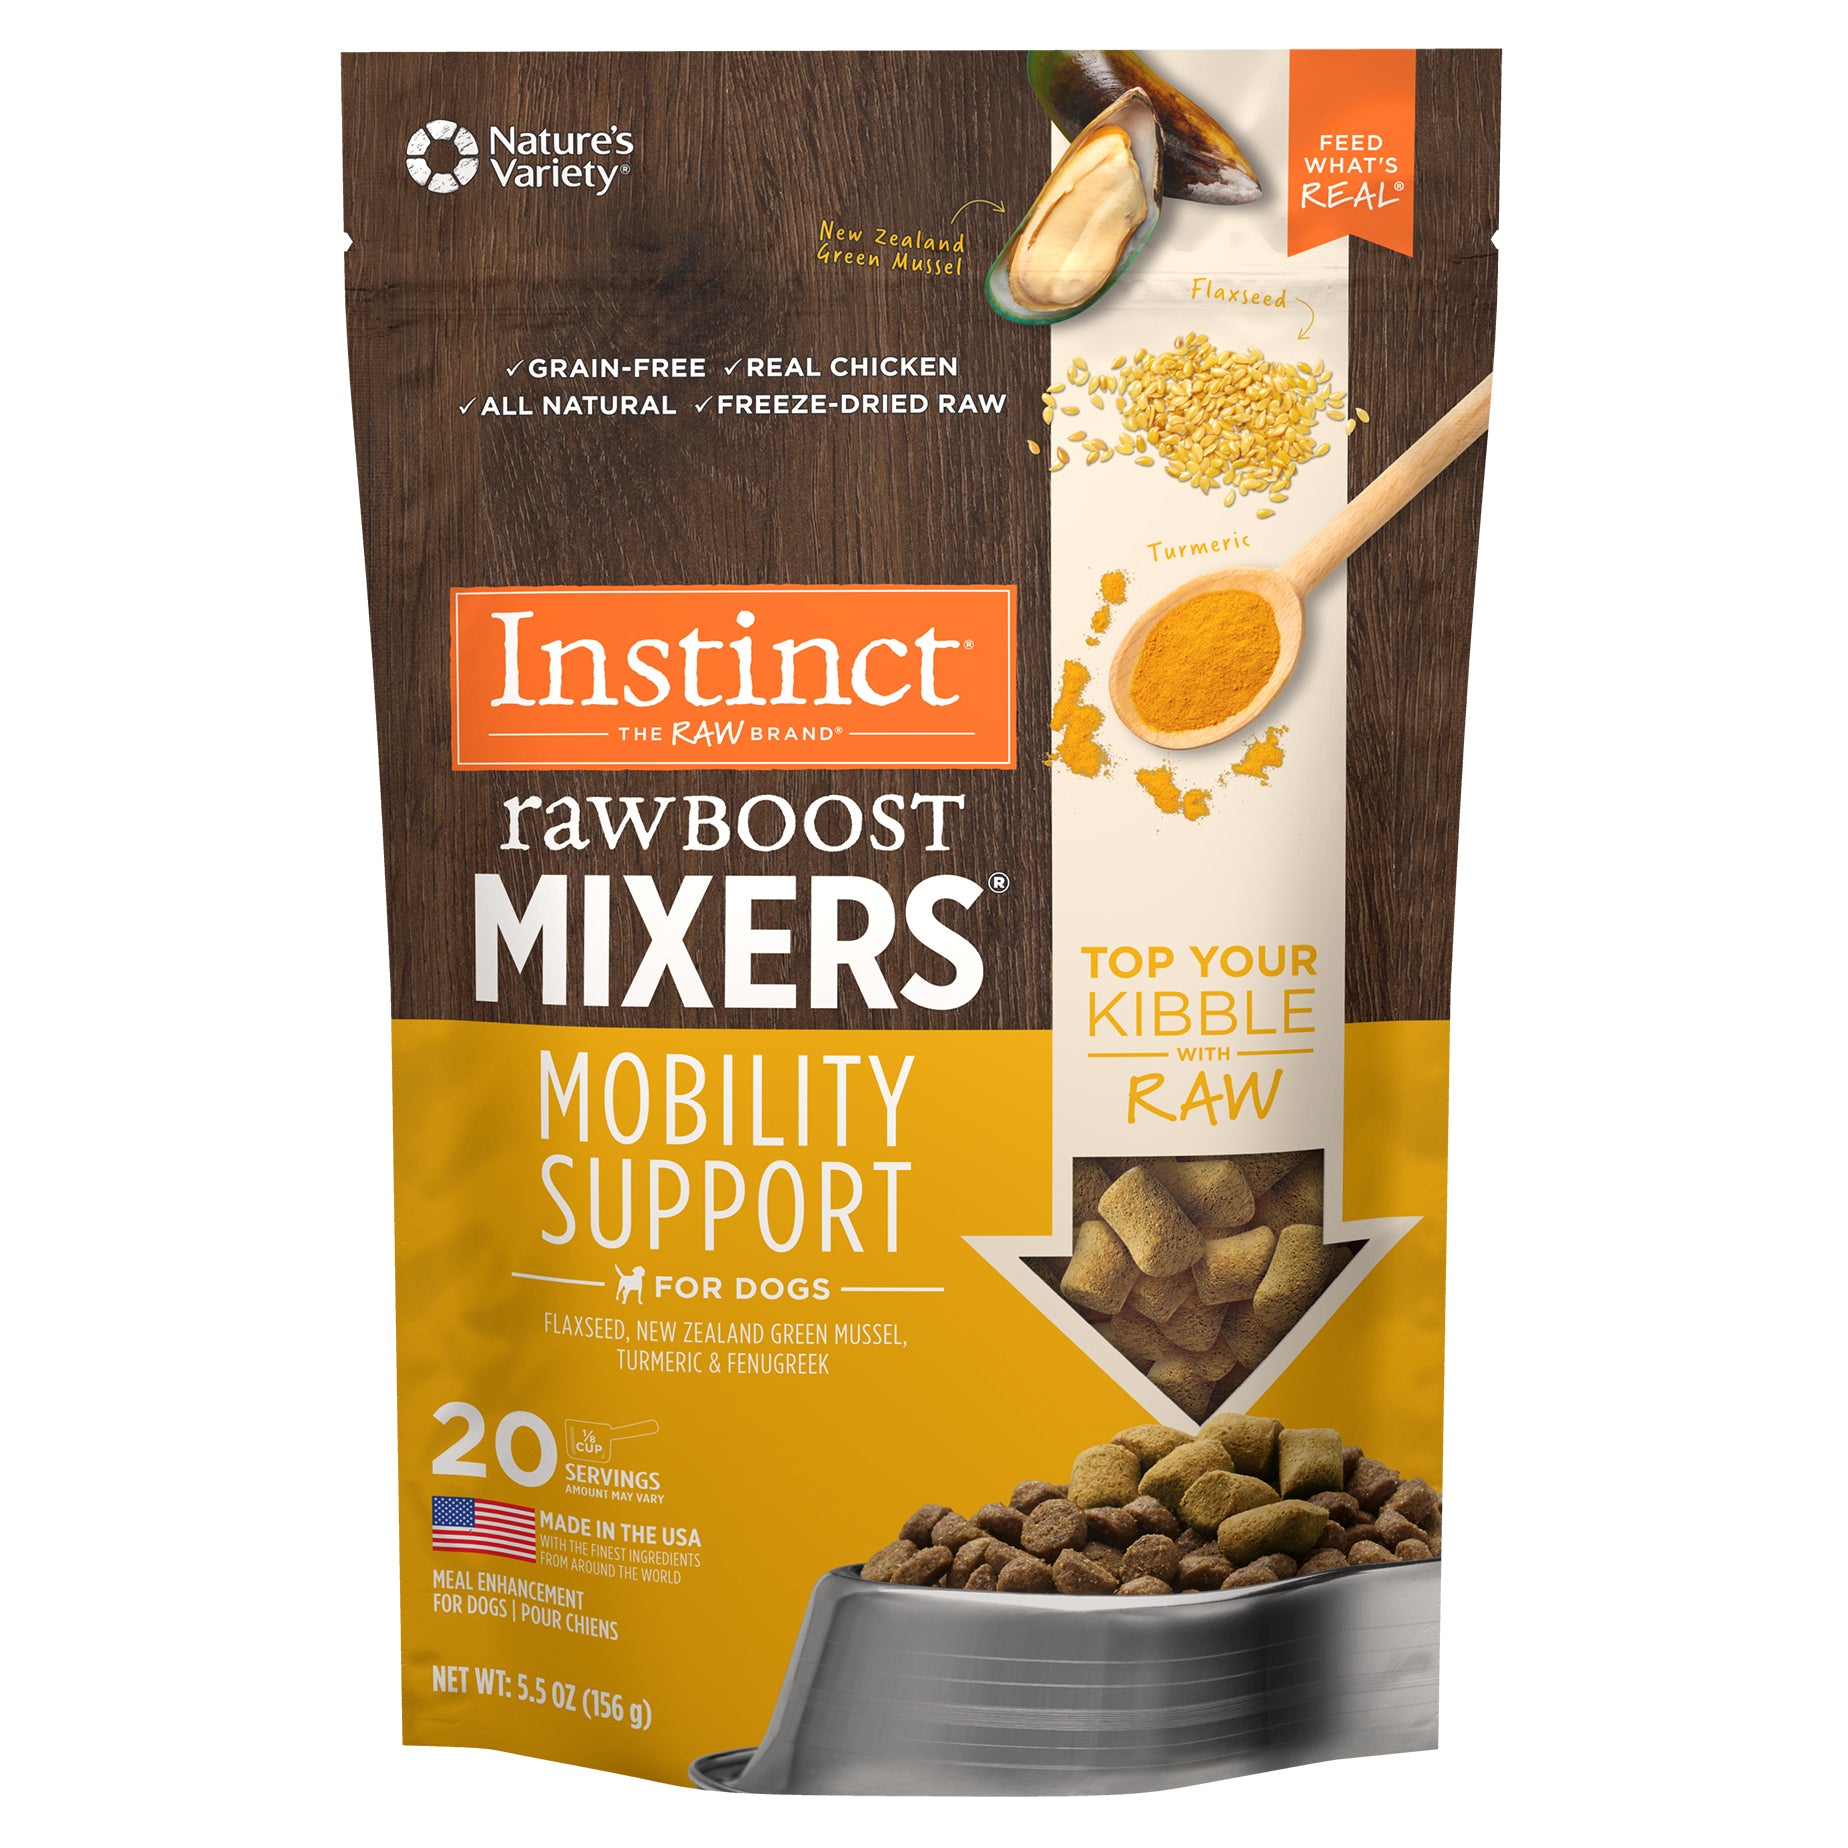 Nature's Variety Instinct Raw Boost Mixers Mobility Support